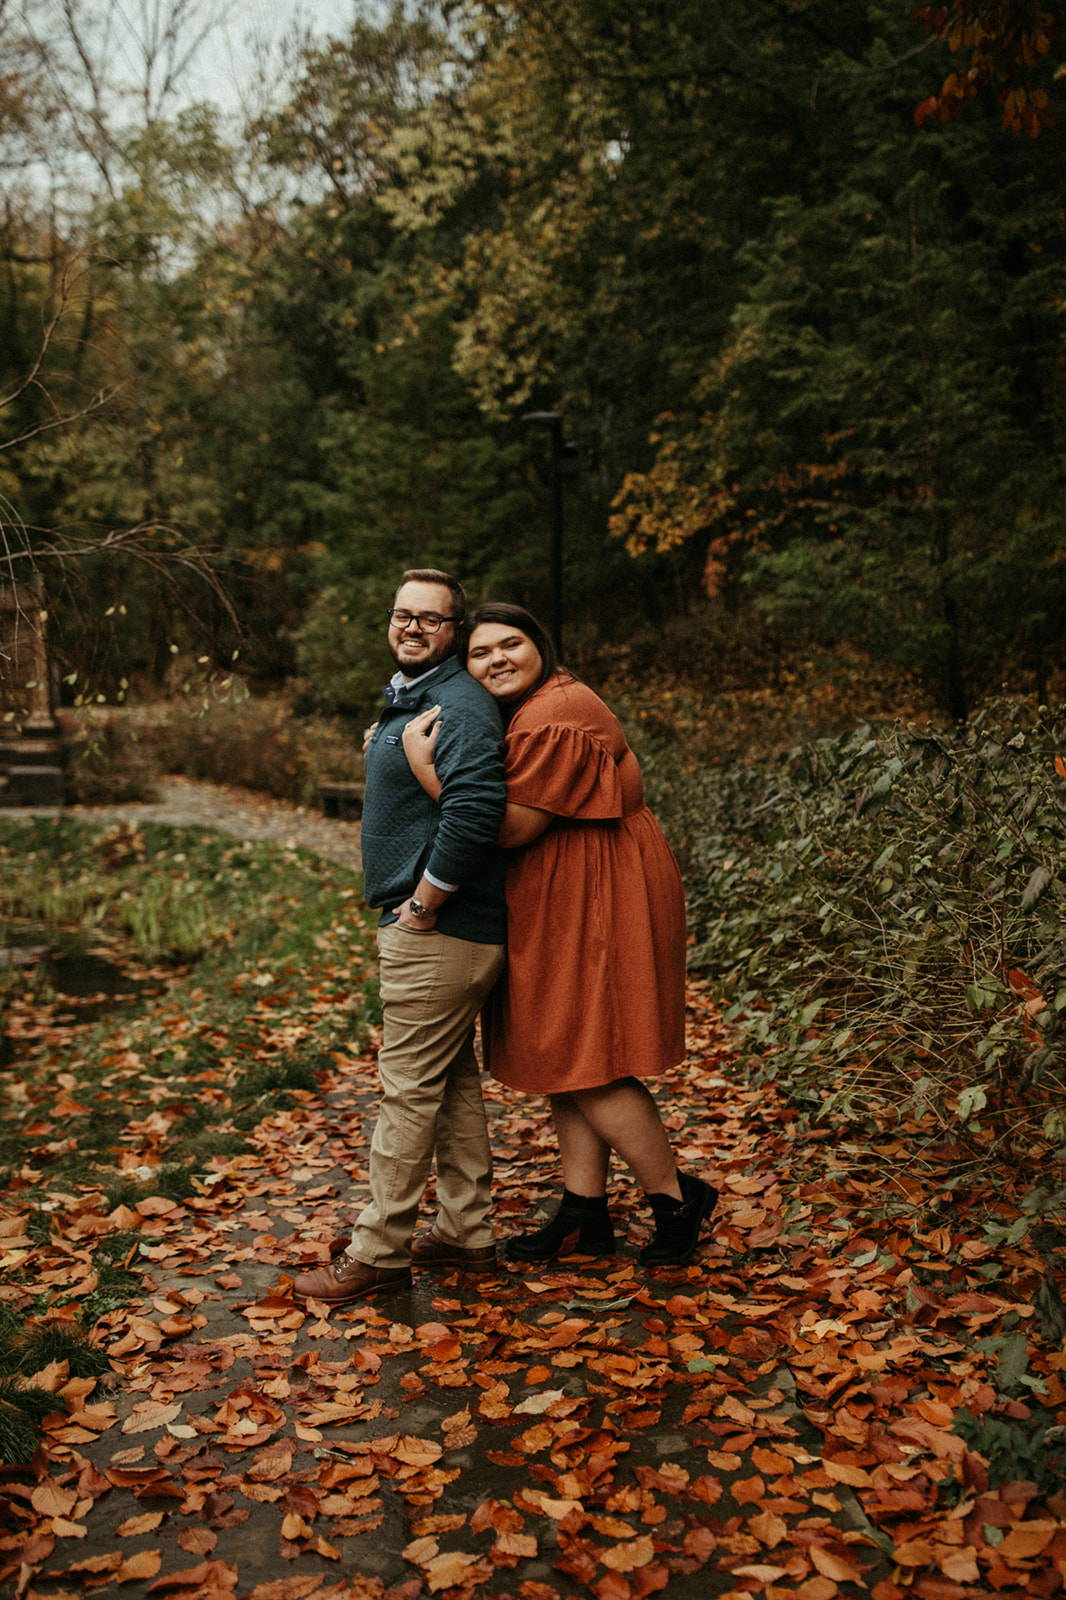 Henne Engagement Ring Couple Jesse and Katie Share a Hug in the Woods